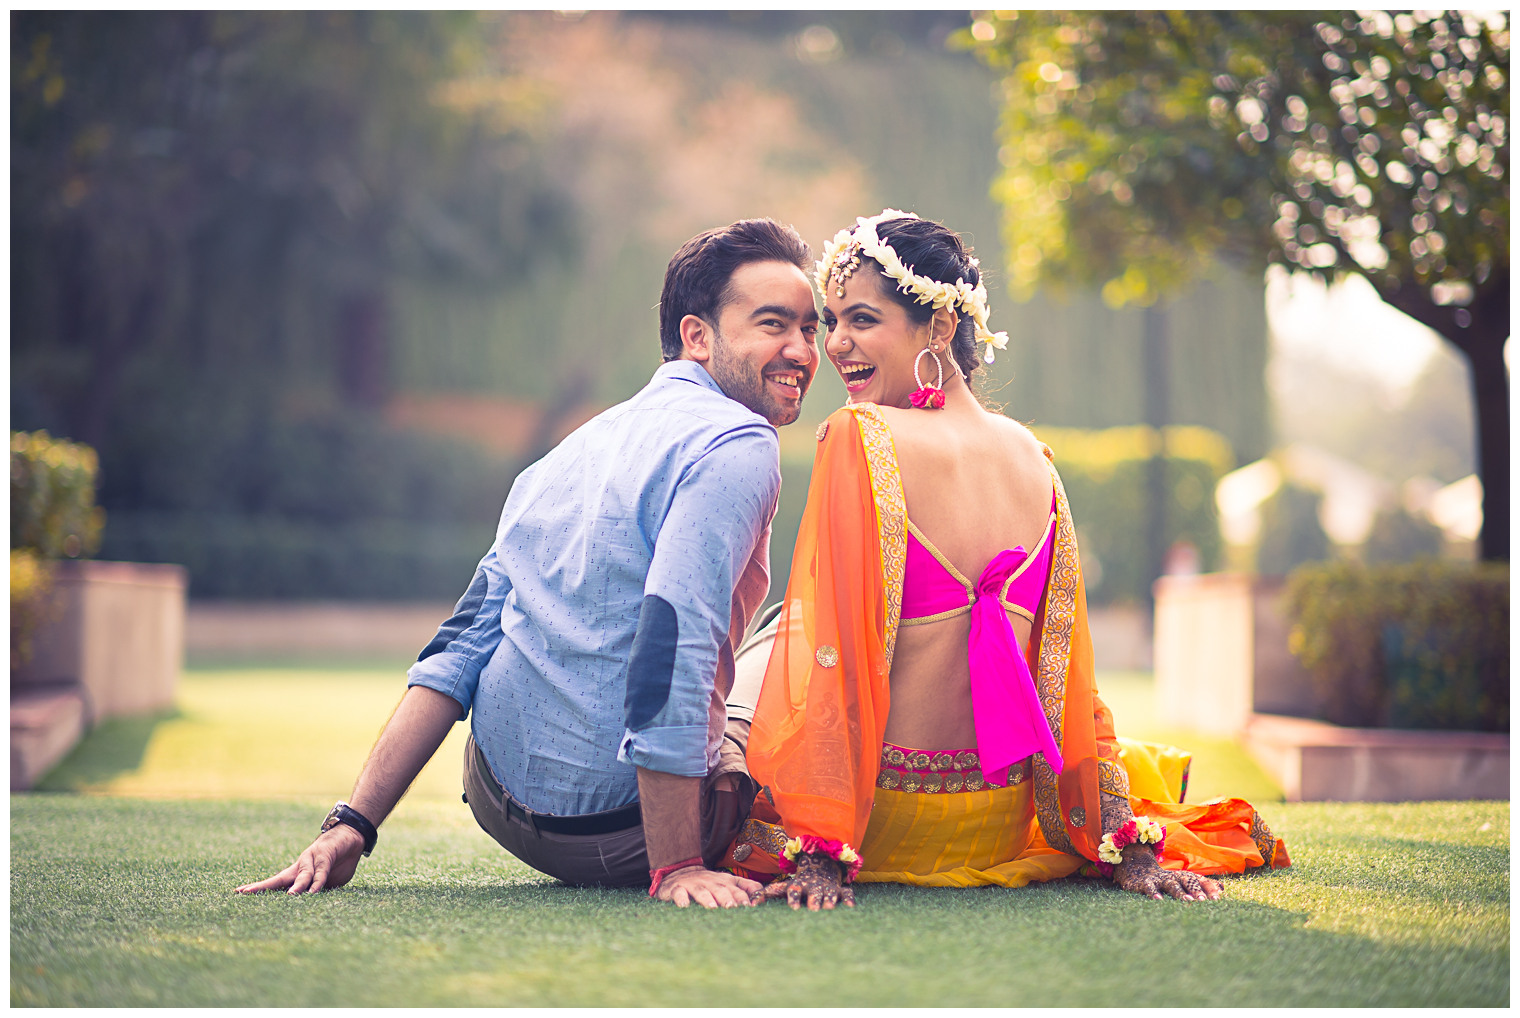 Your Guide to Candid Pre-Wedding Shoots